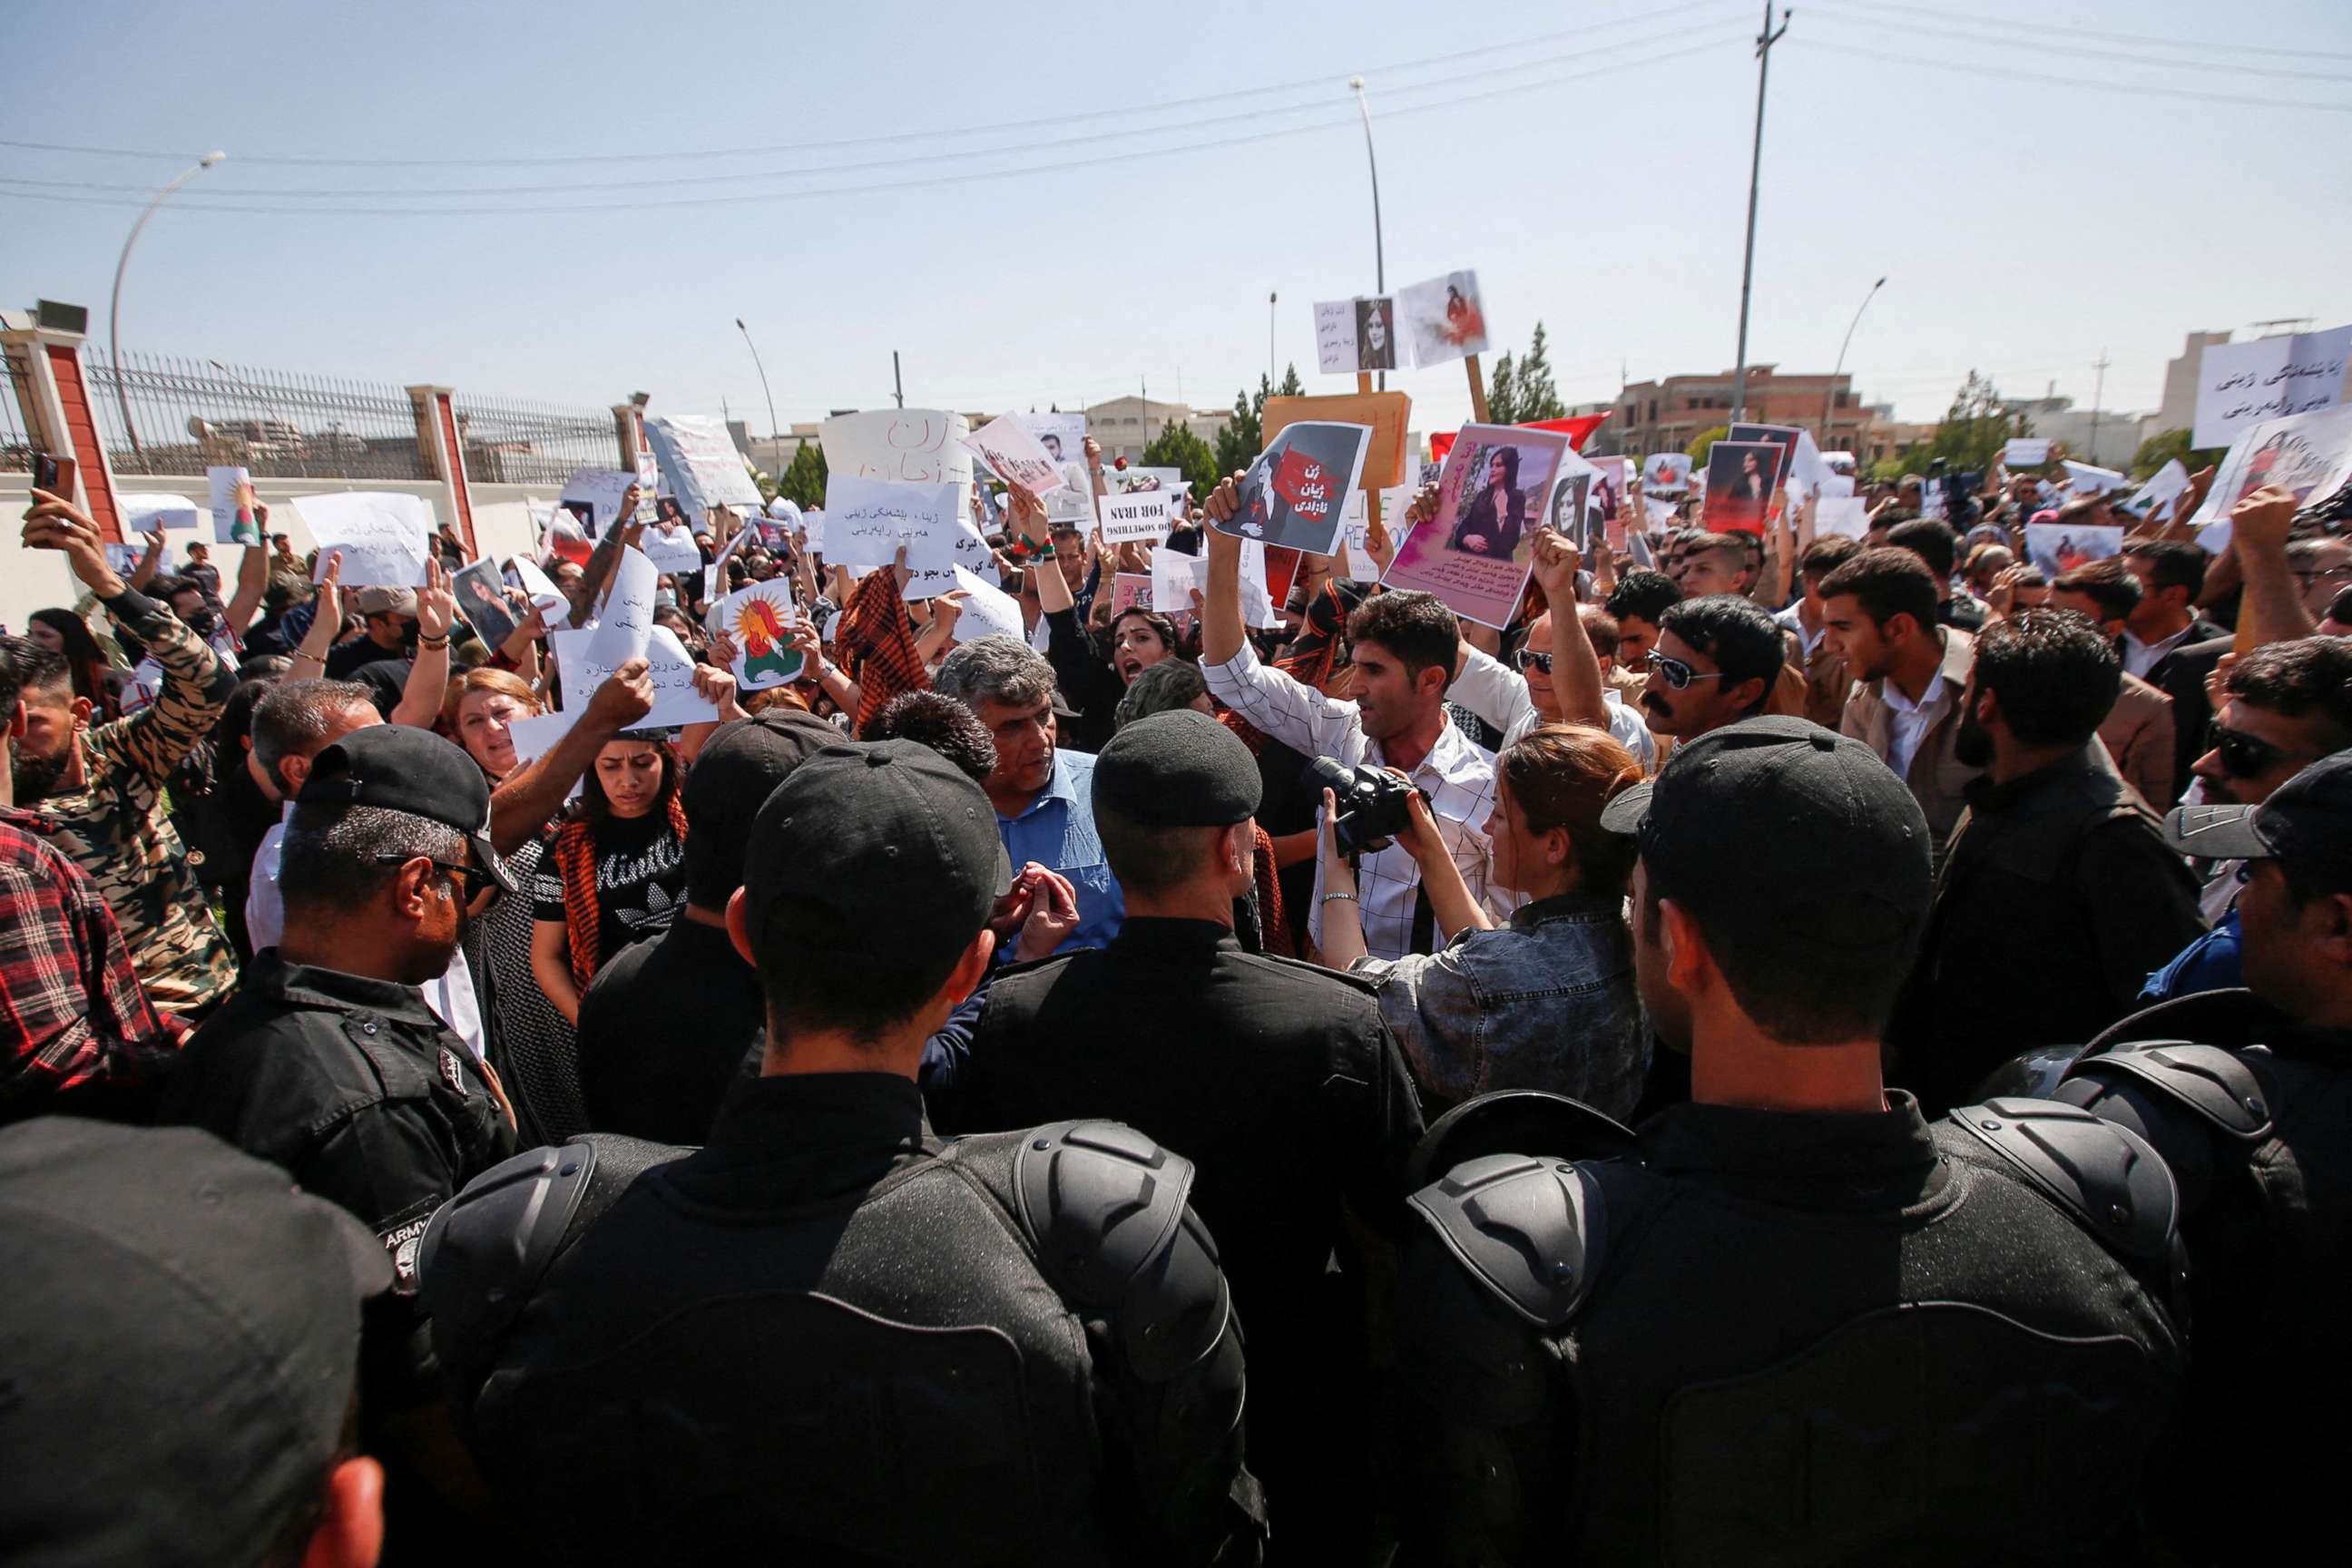 PHOTO: In this Sept. 24, 2022 file photo people take part in a protest following the death of Mahsa Amini in front of the United Nations headquarters in Erbil, Iraq, Sept. 24, 2022.